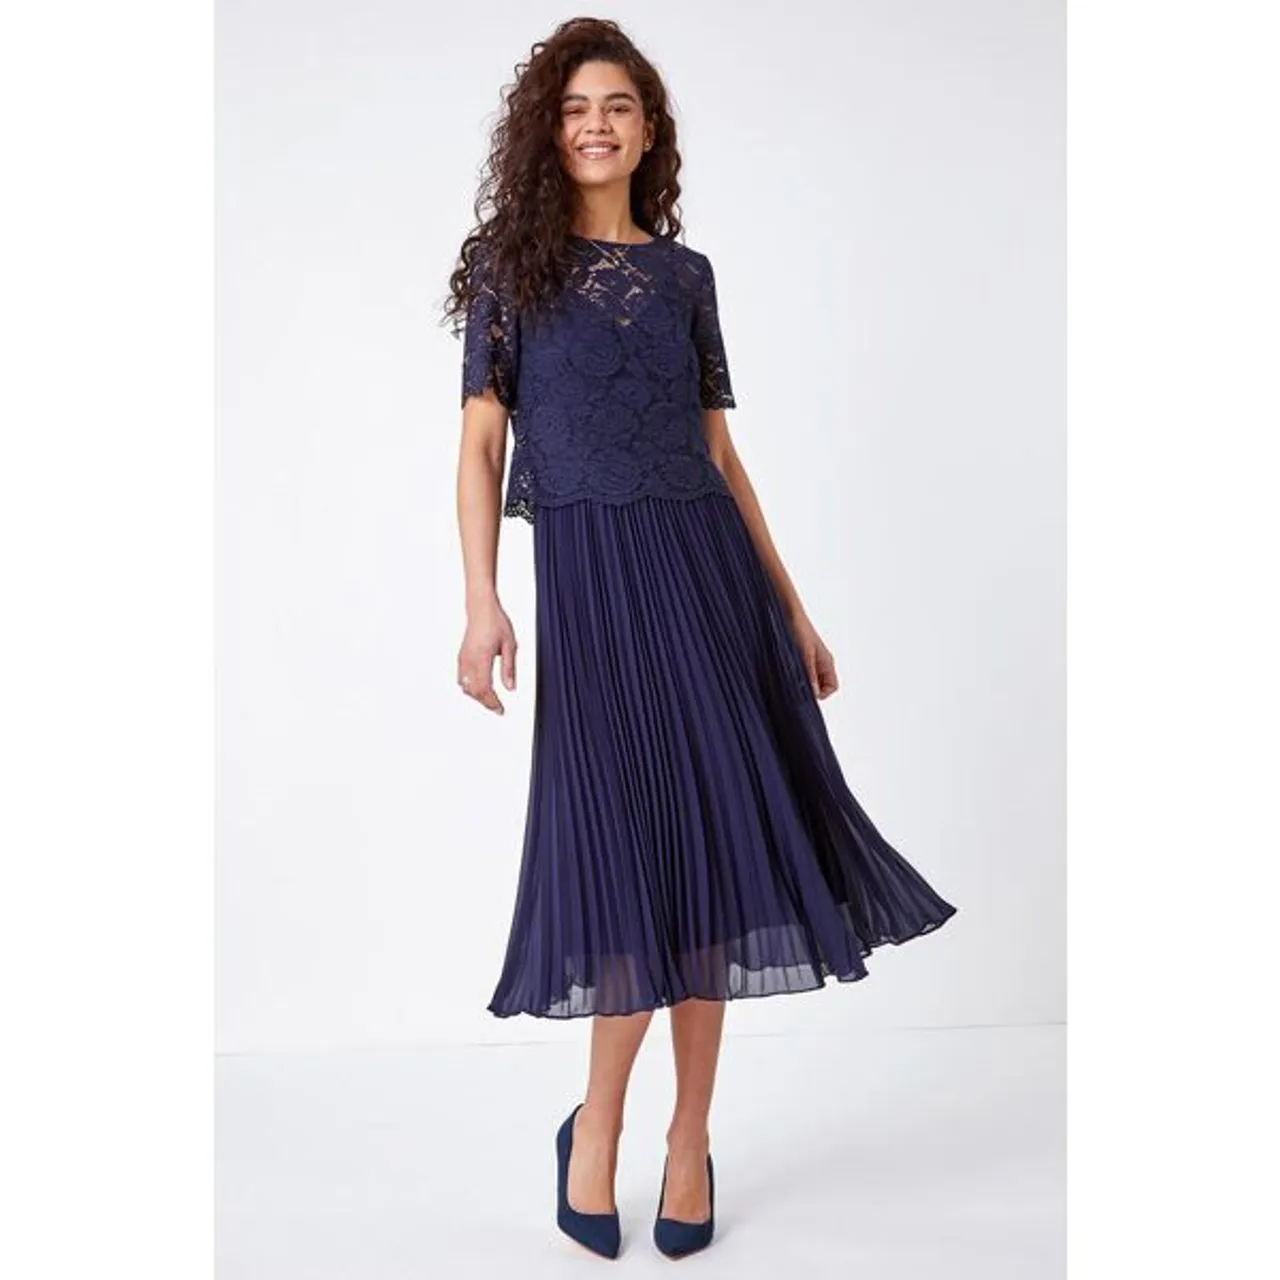 Roman Lace Top Overlay Pleated Midi Party Occasion Dress in Navy - Size 16 16 female